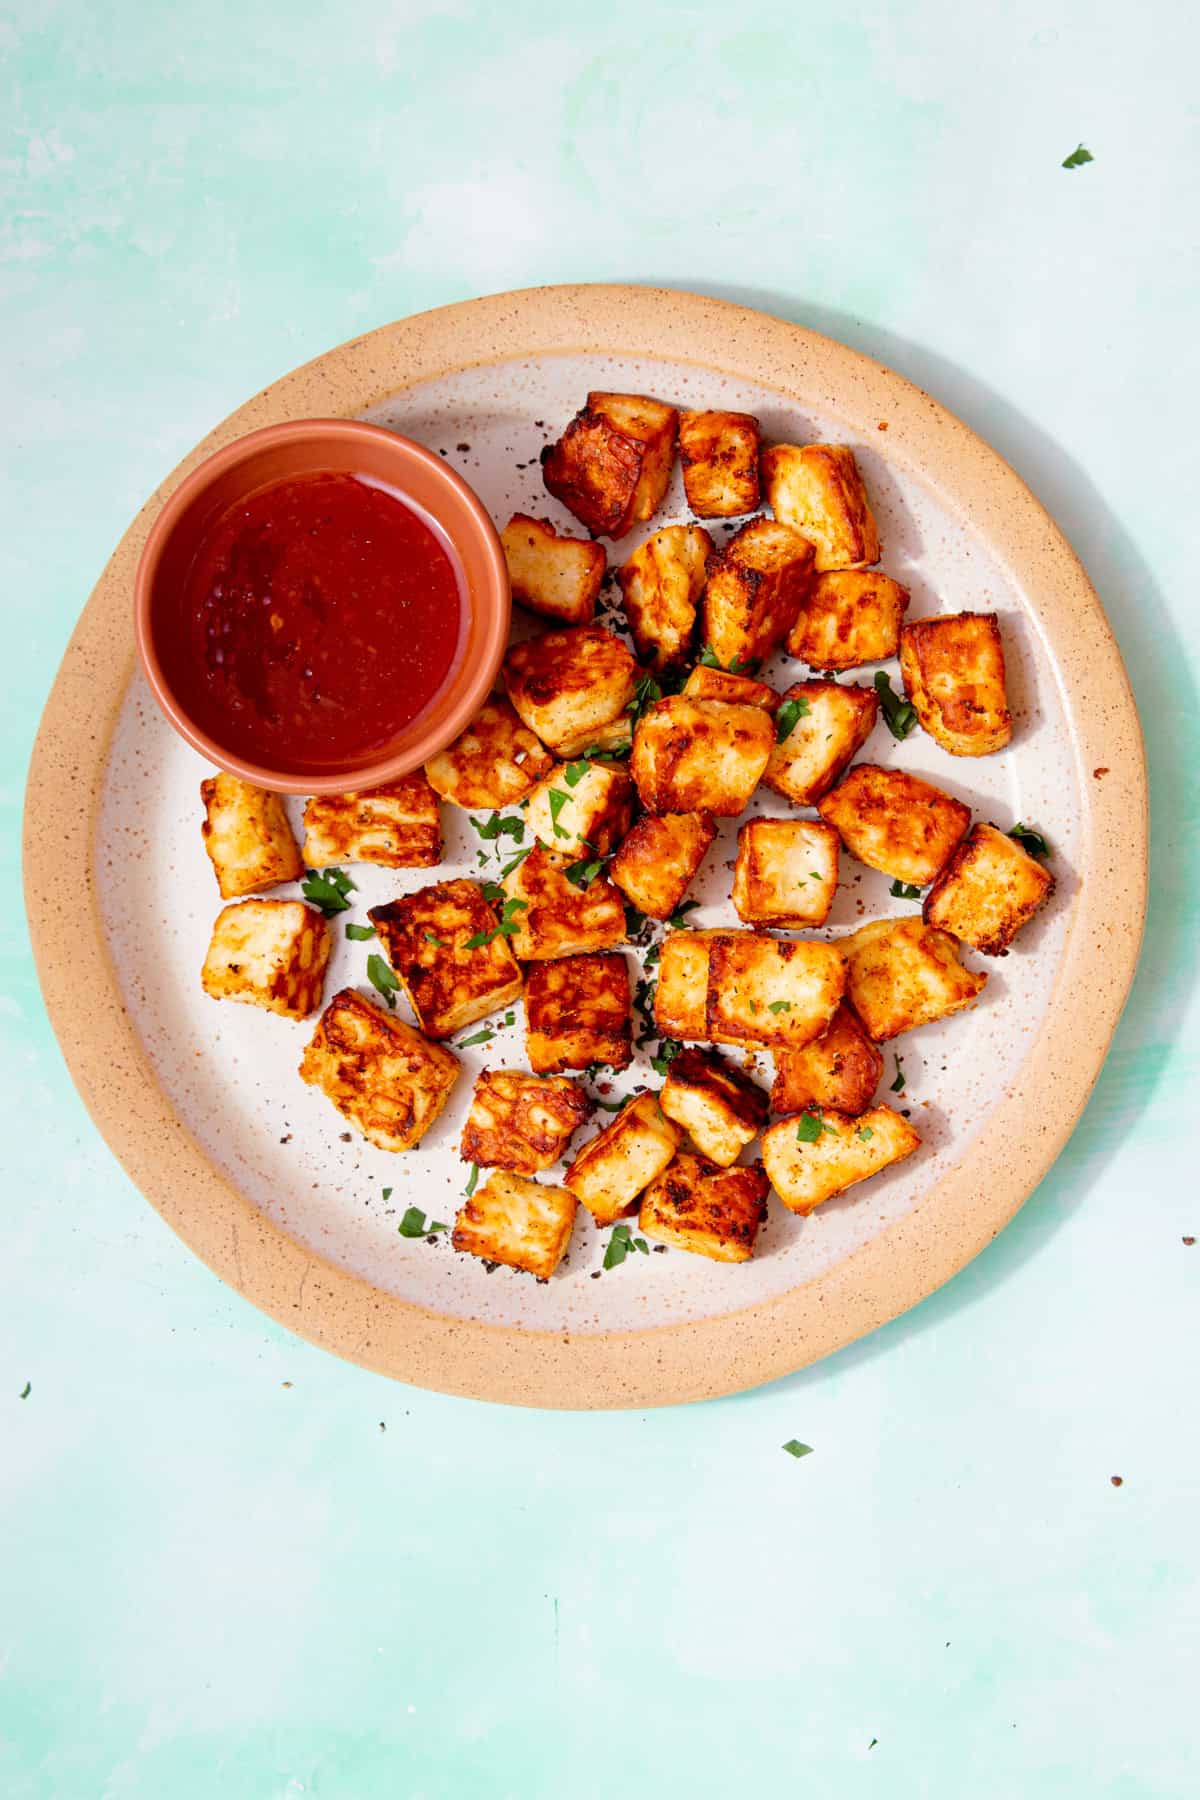 A plate filled with golden browned halloumi cubes with some green herbs and a small bowl of chilli sauce.